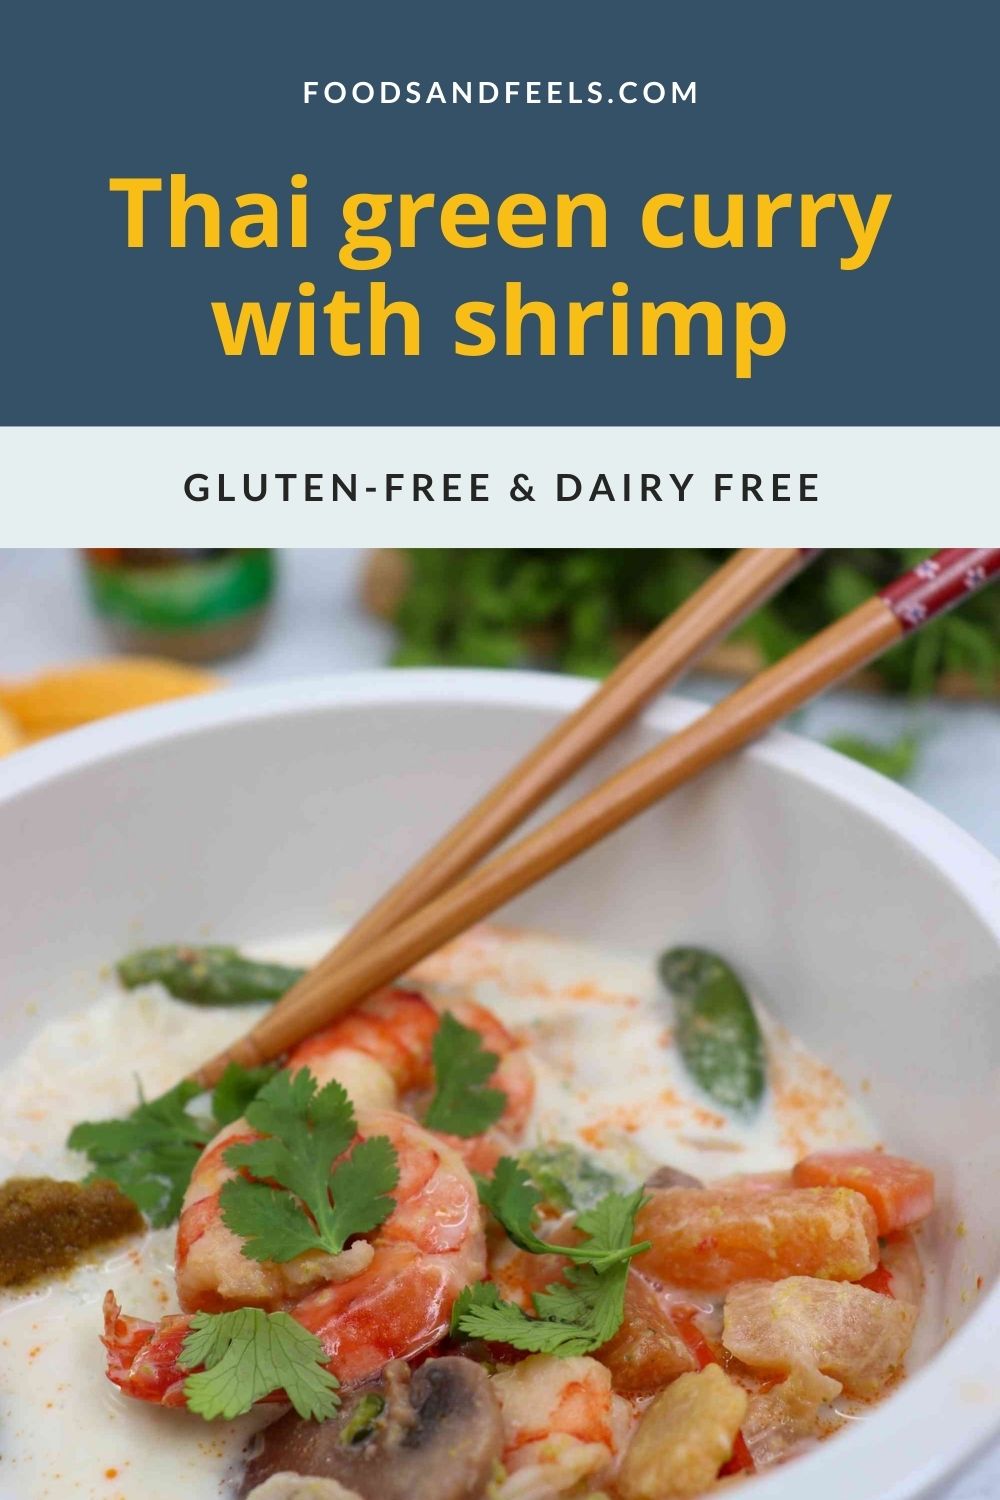 Thai green curry with shrimp (gluten & dairy free) Pinterest pin